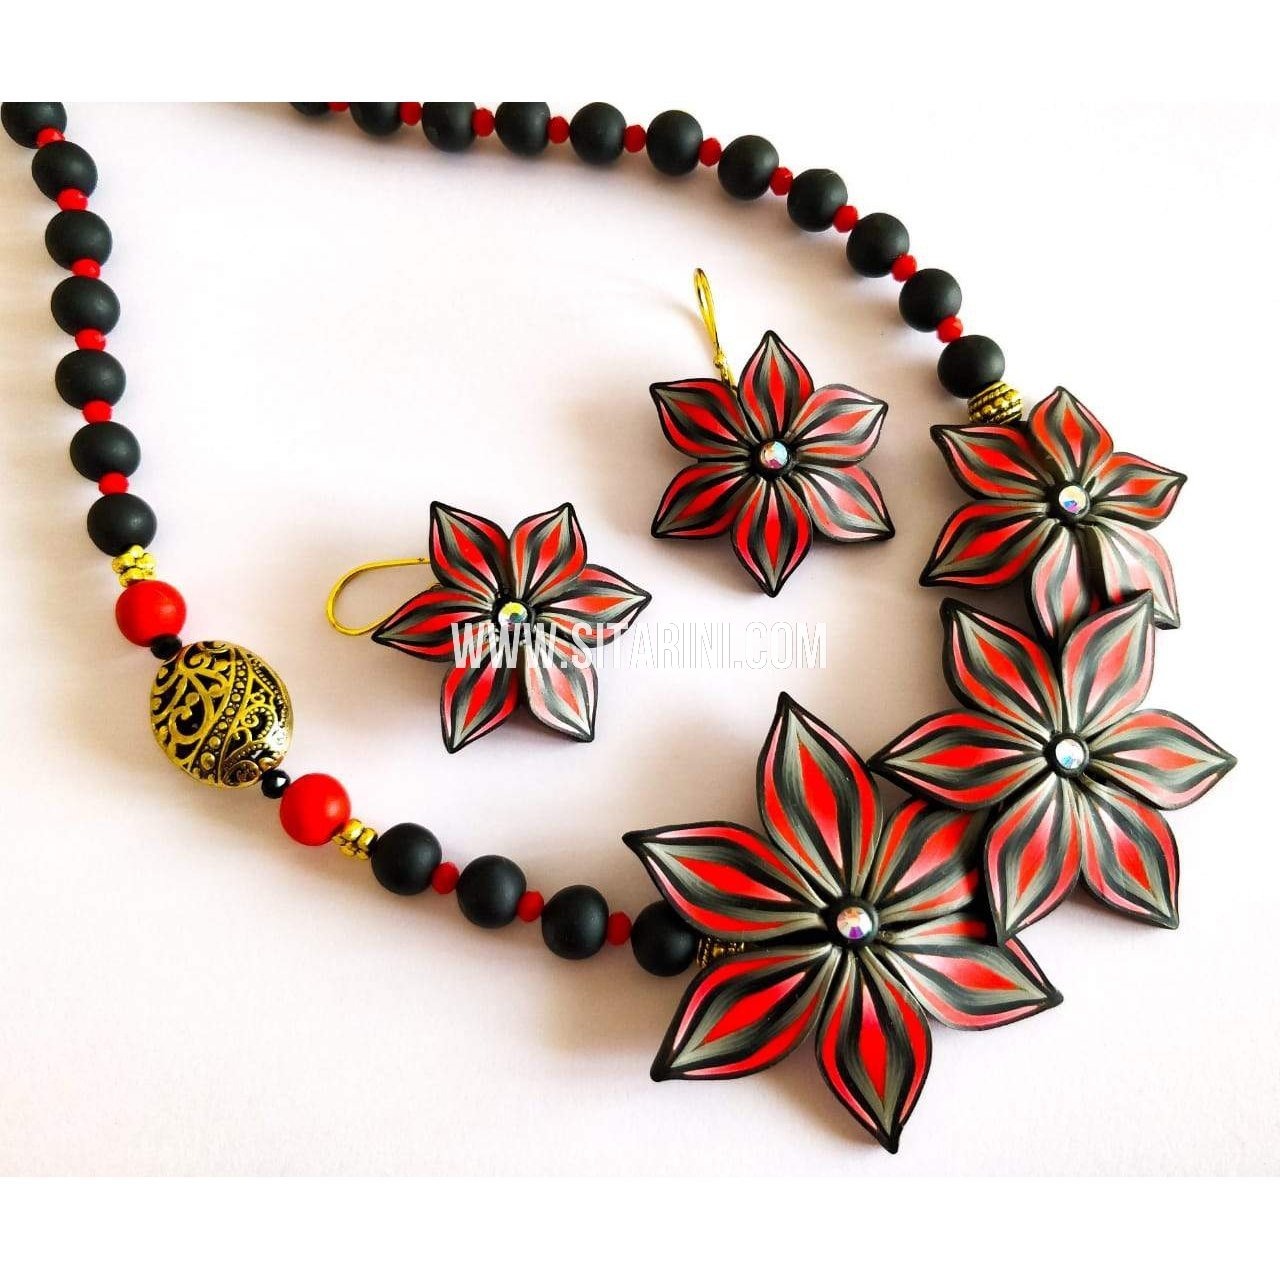 [Image: polymer-clay-jewelry-necklace-and-earrin...1529125994]